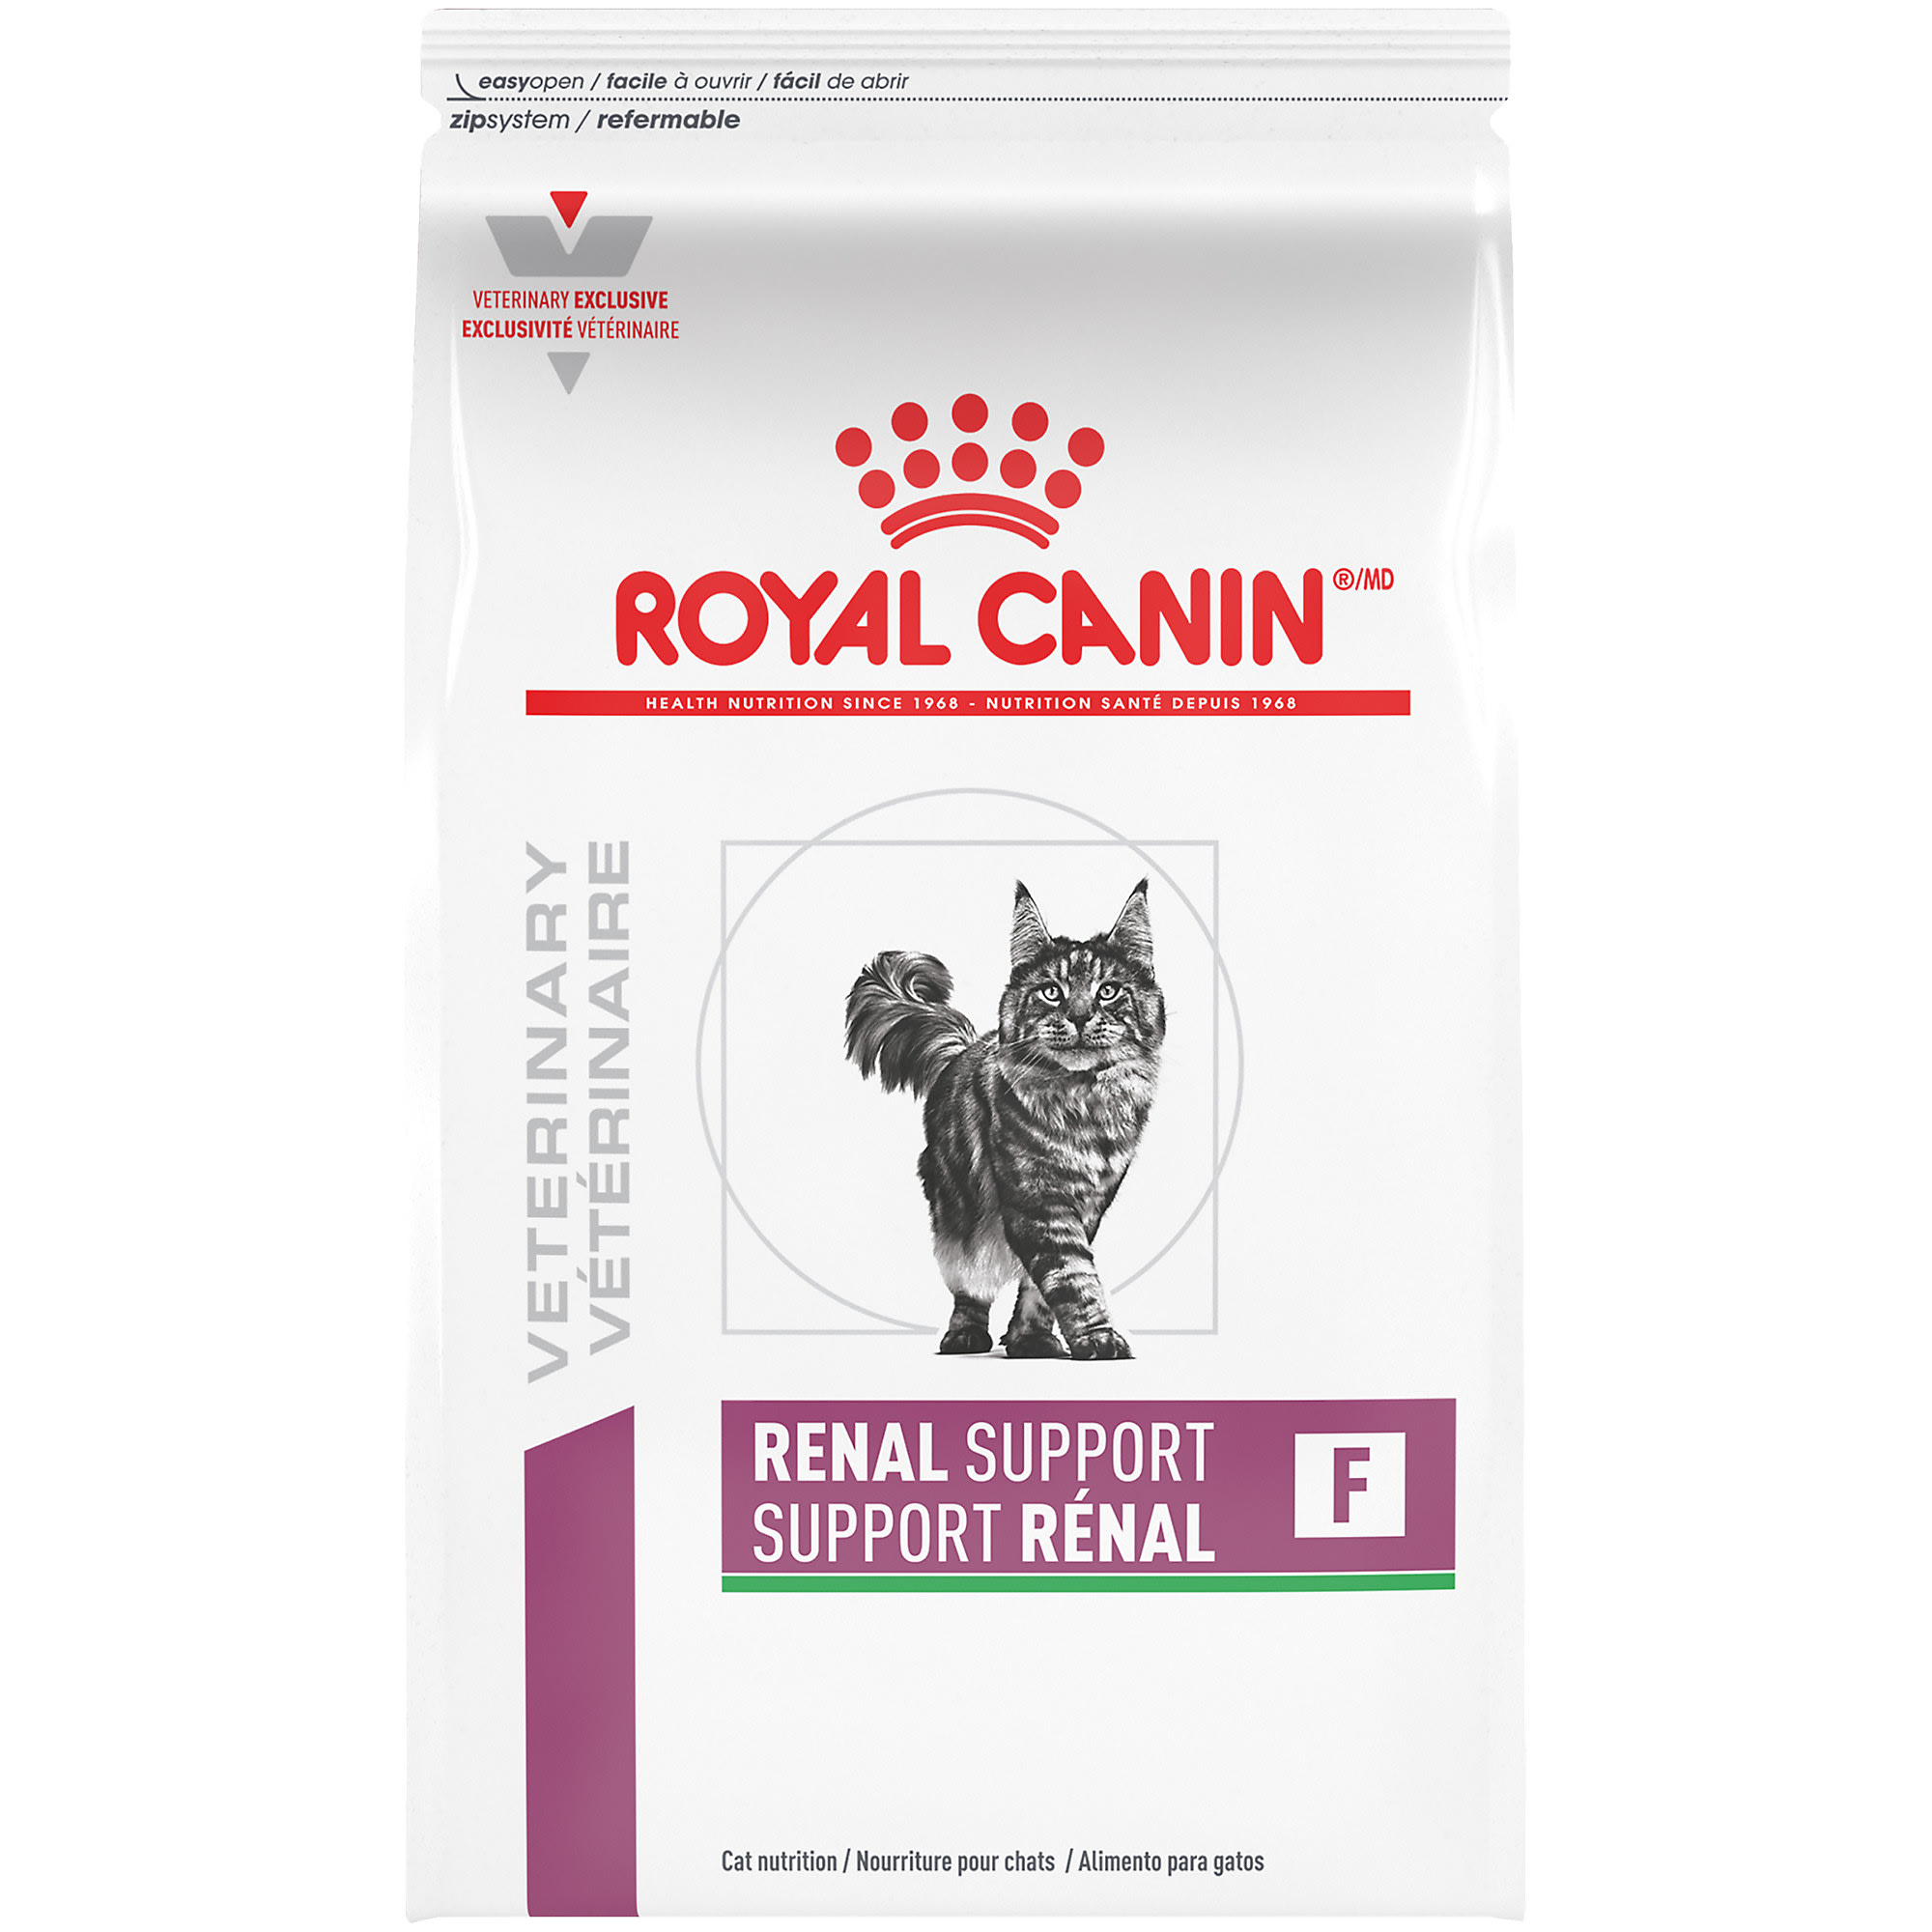 Pompeii analoog Taalkunde Royal Canin Renal Support F Dry Cat Food, 6.6 lbs. | Petco